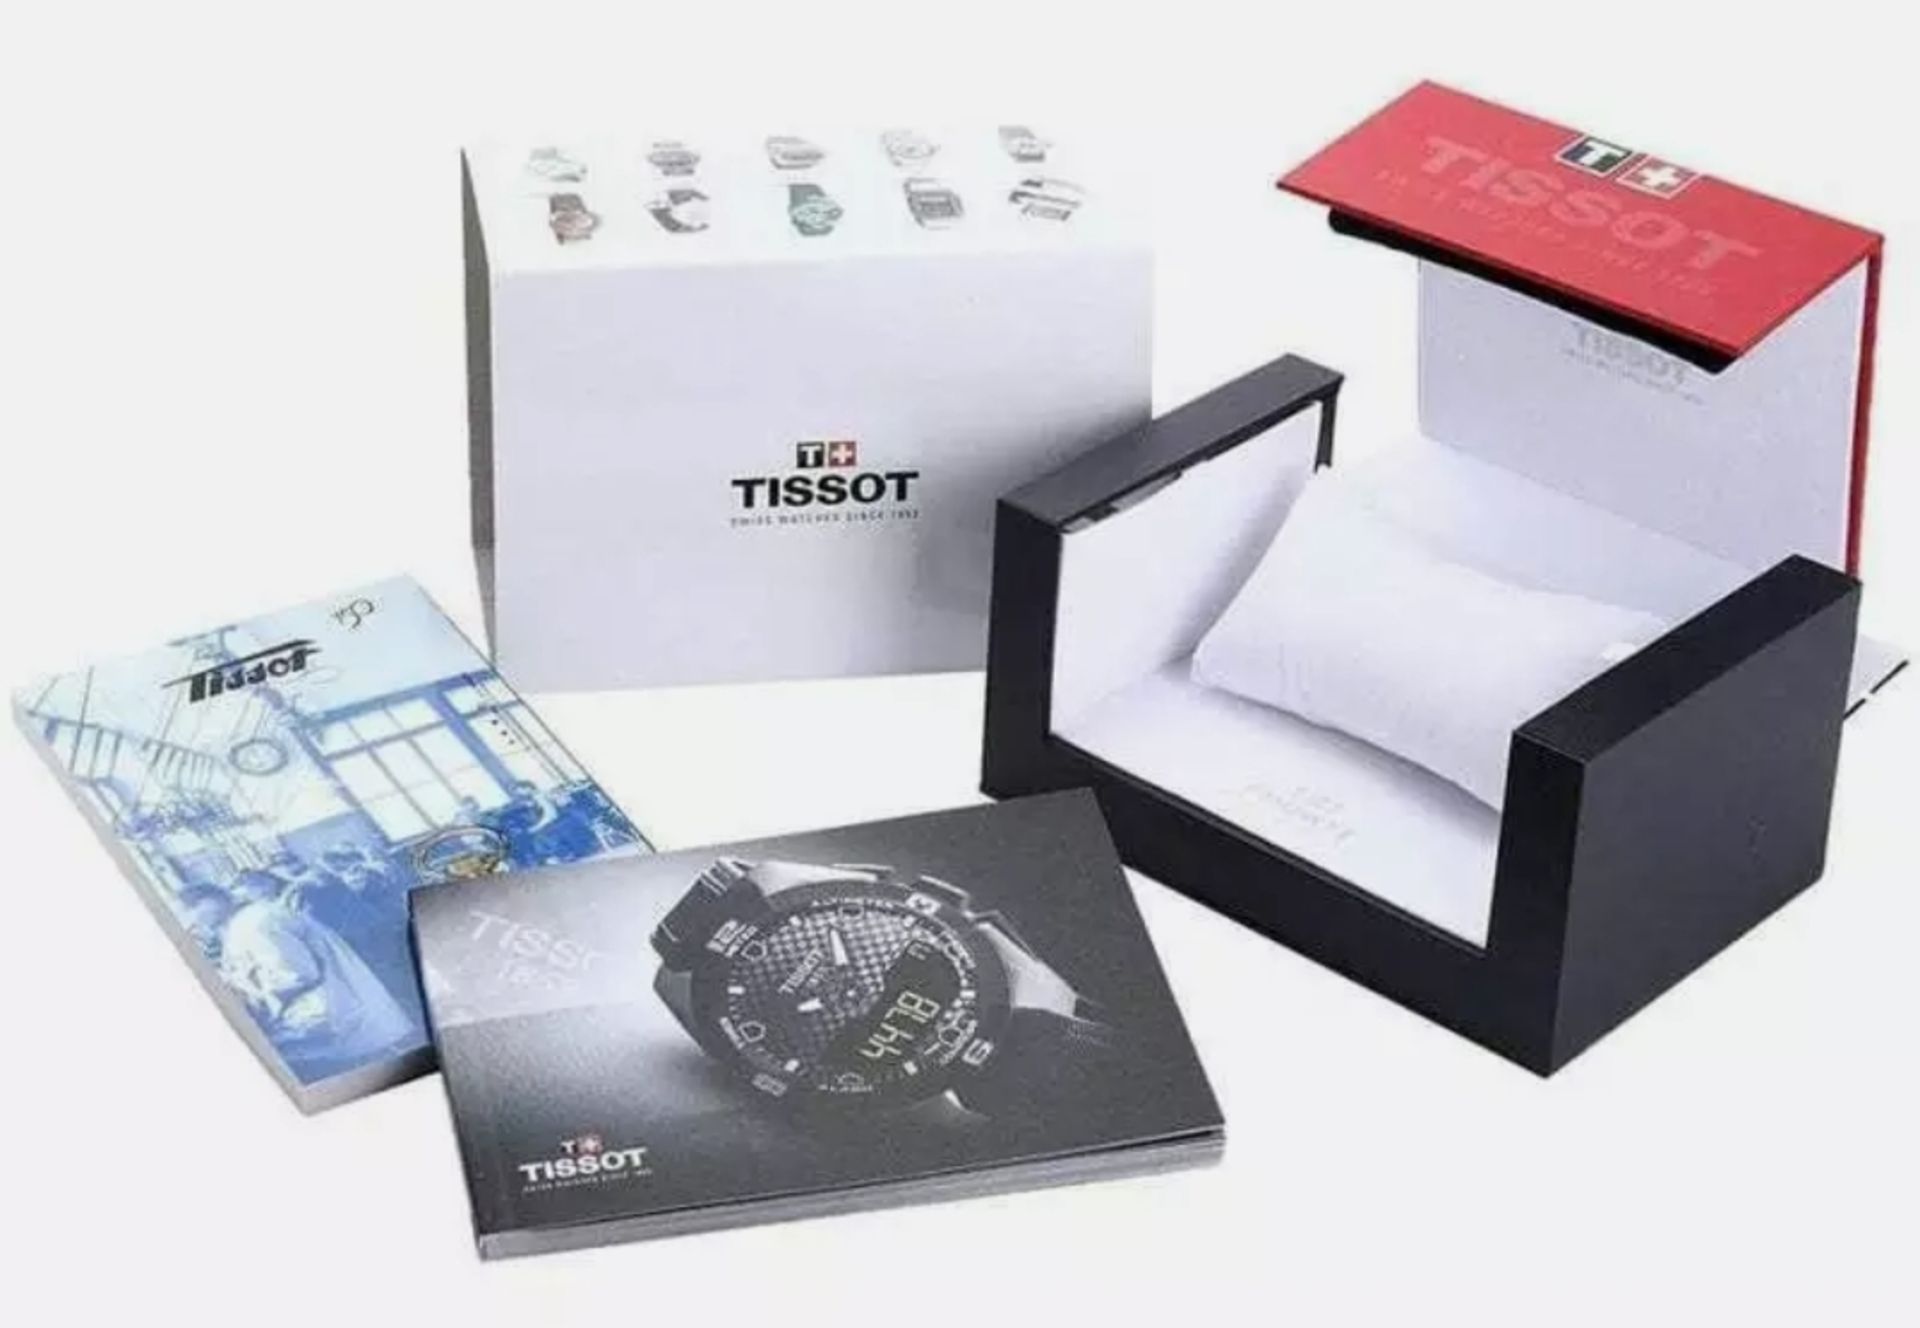 Tissot T-Trend Couturier T035.617.16.051.00 Chronograph Watch For Men - Image 11 of 11